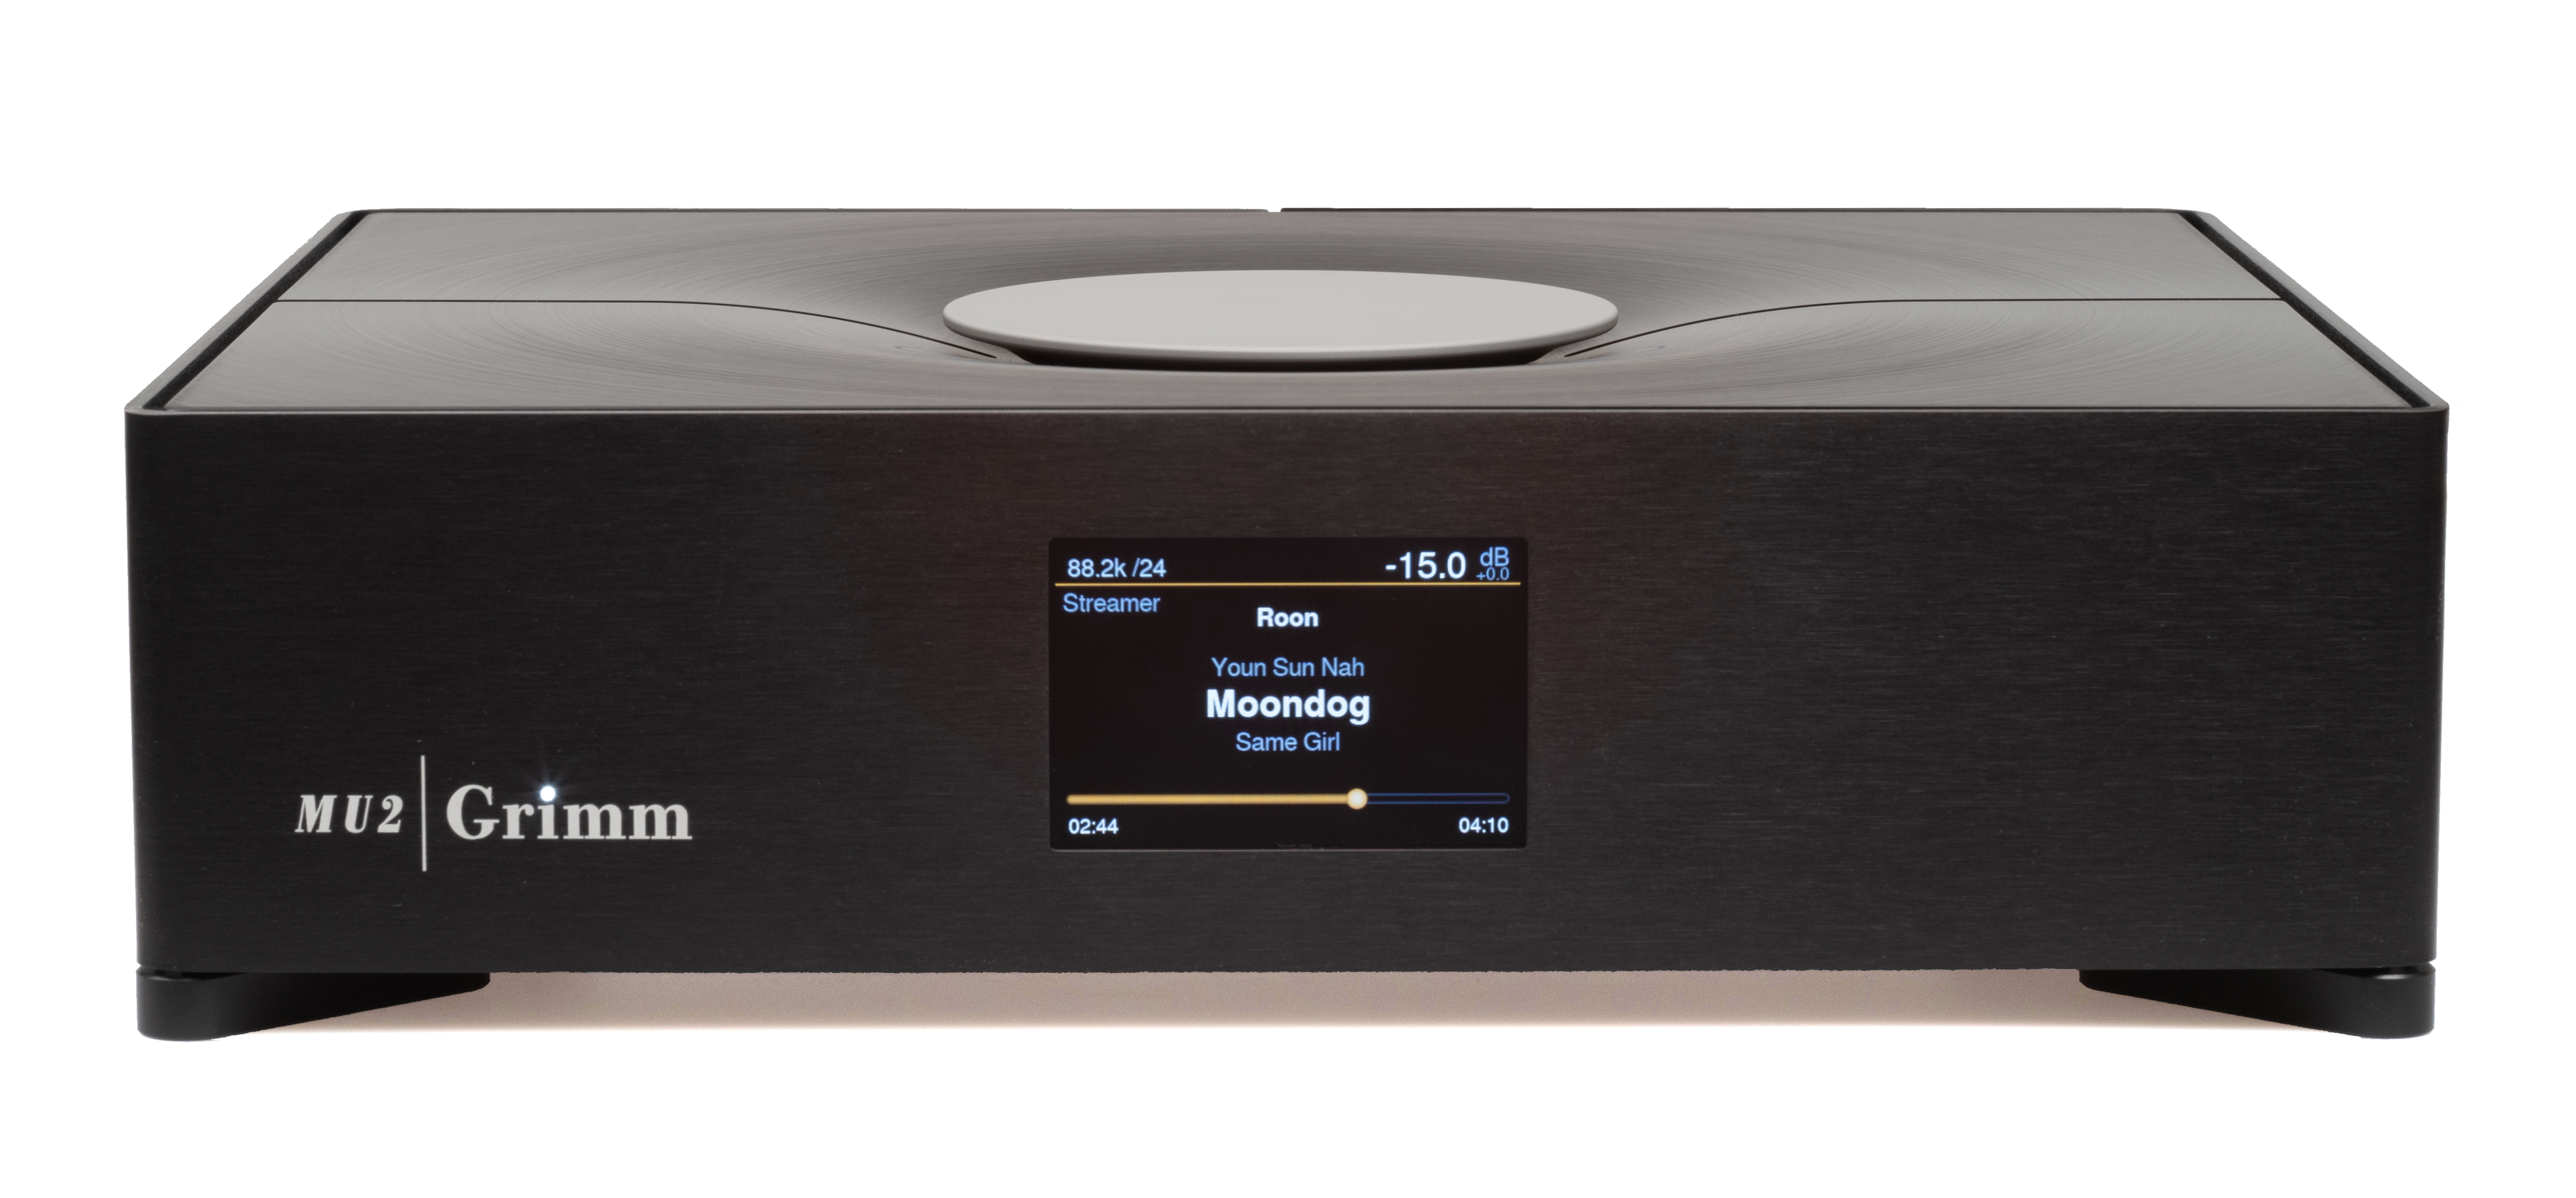 The Grimm Audio MU2 is tearing it up with stellar reviews!